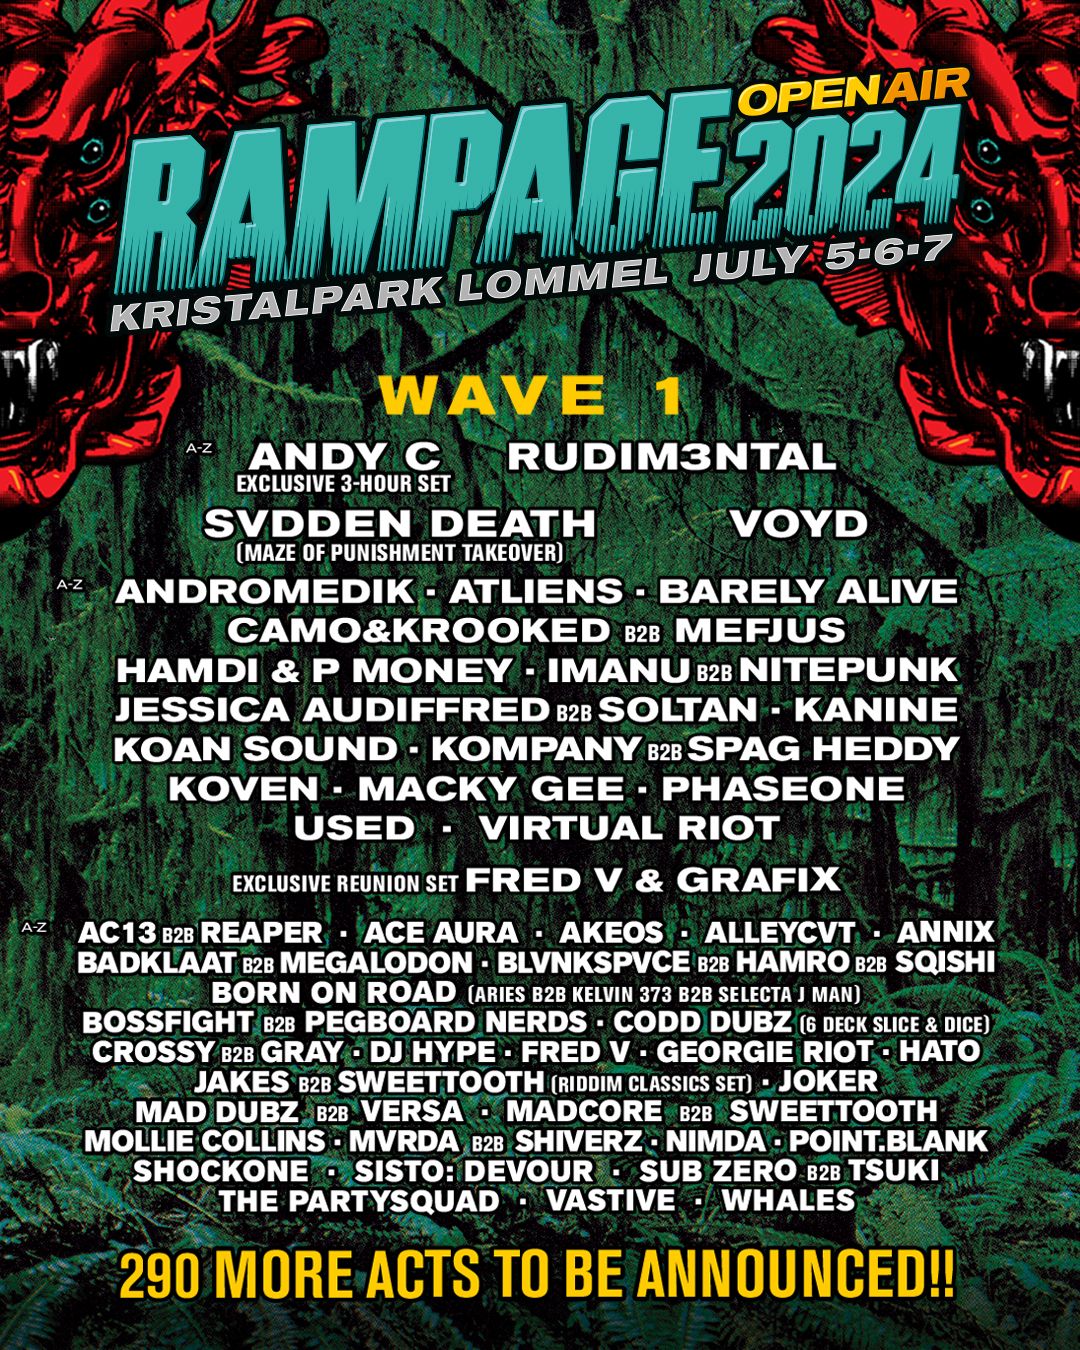 RAMPAGE OPEN AIR 2024